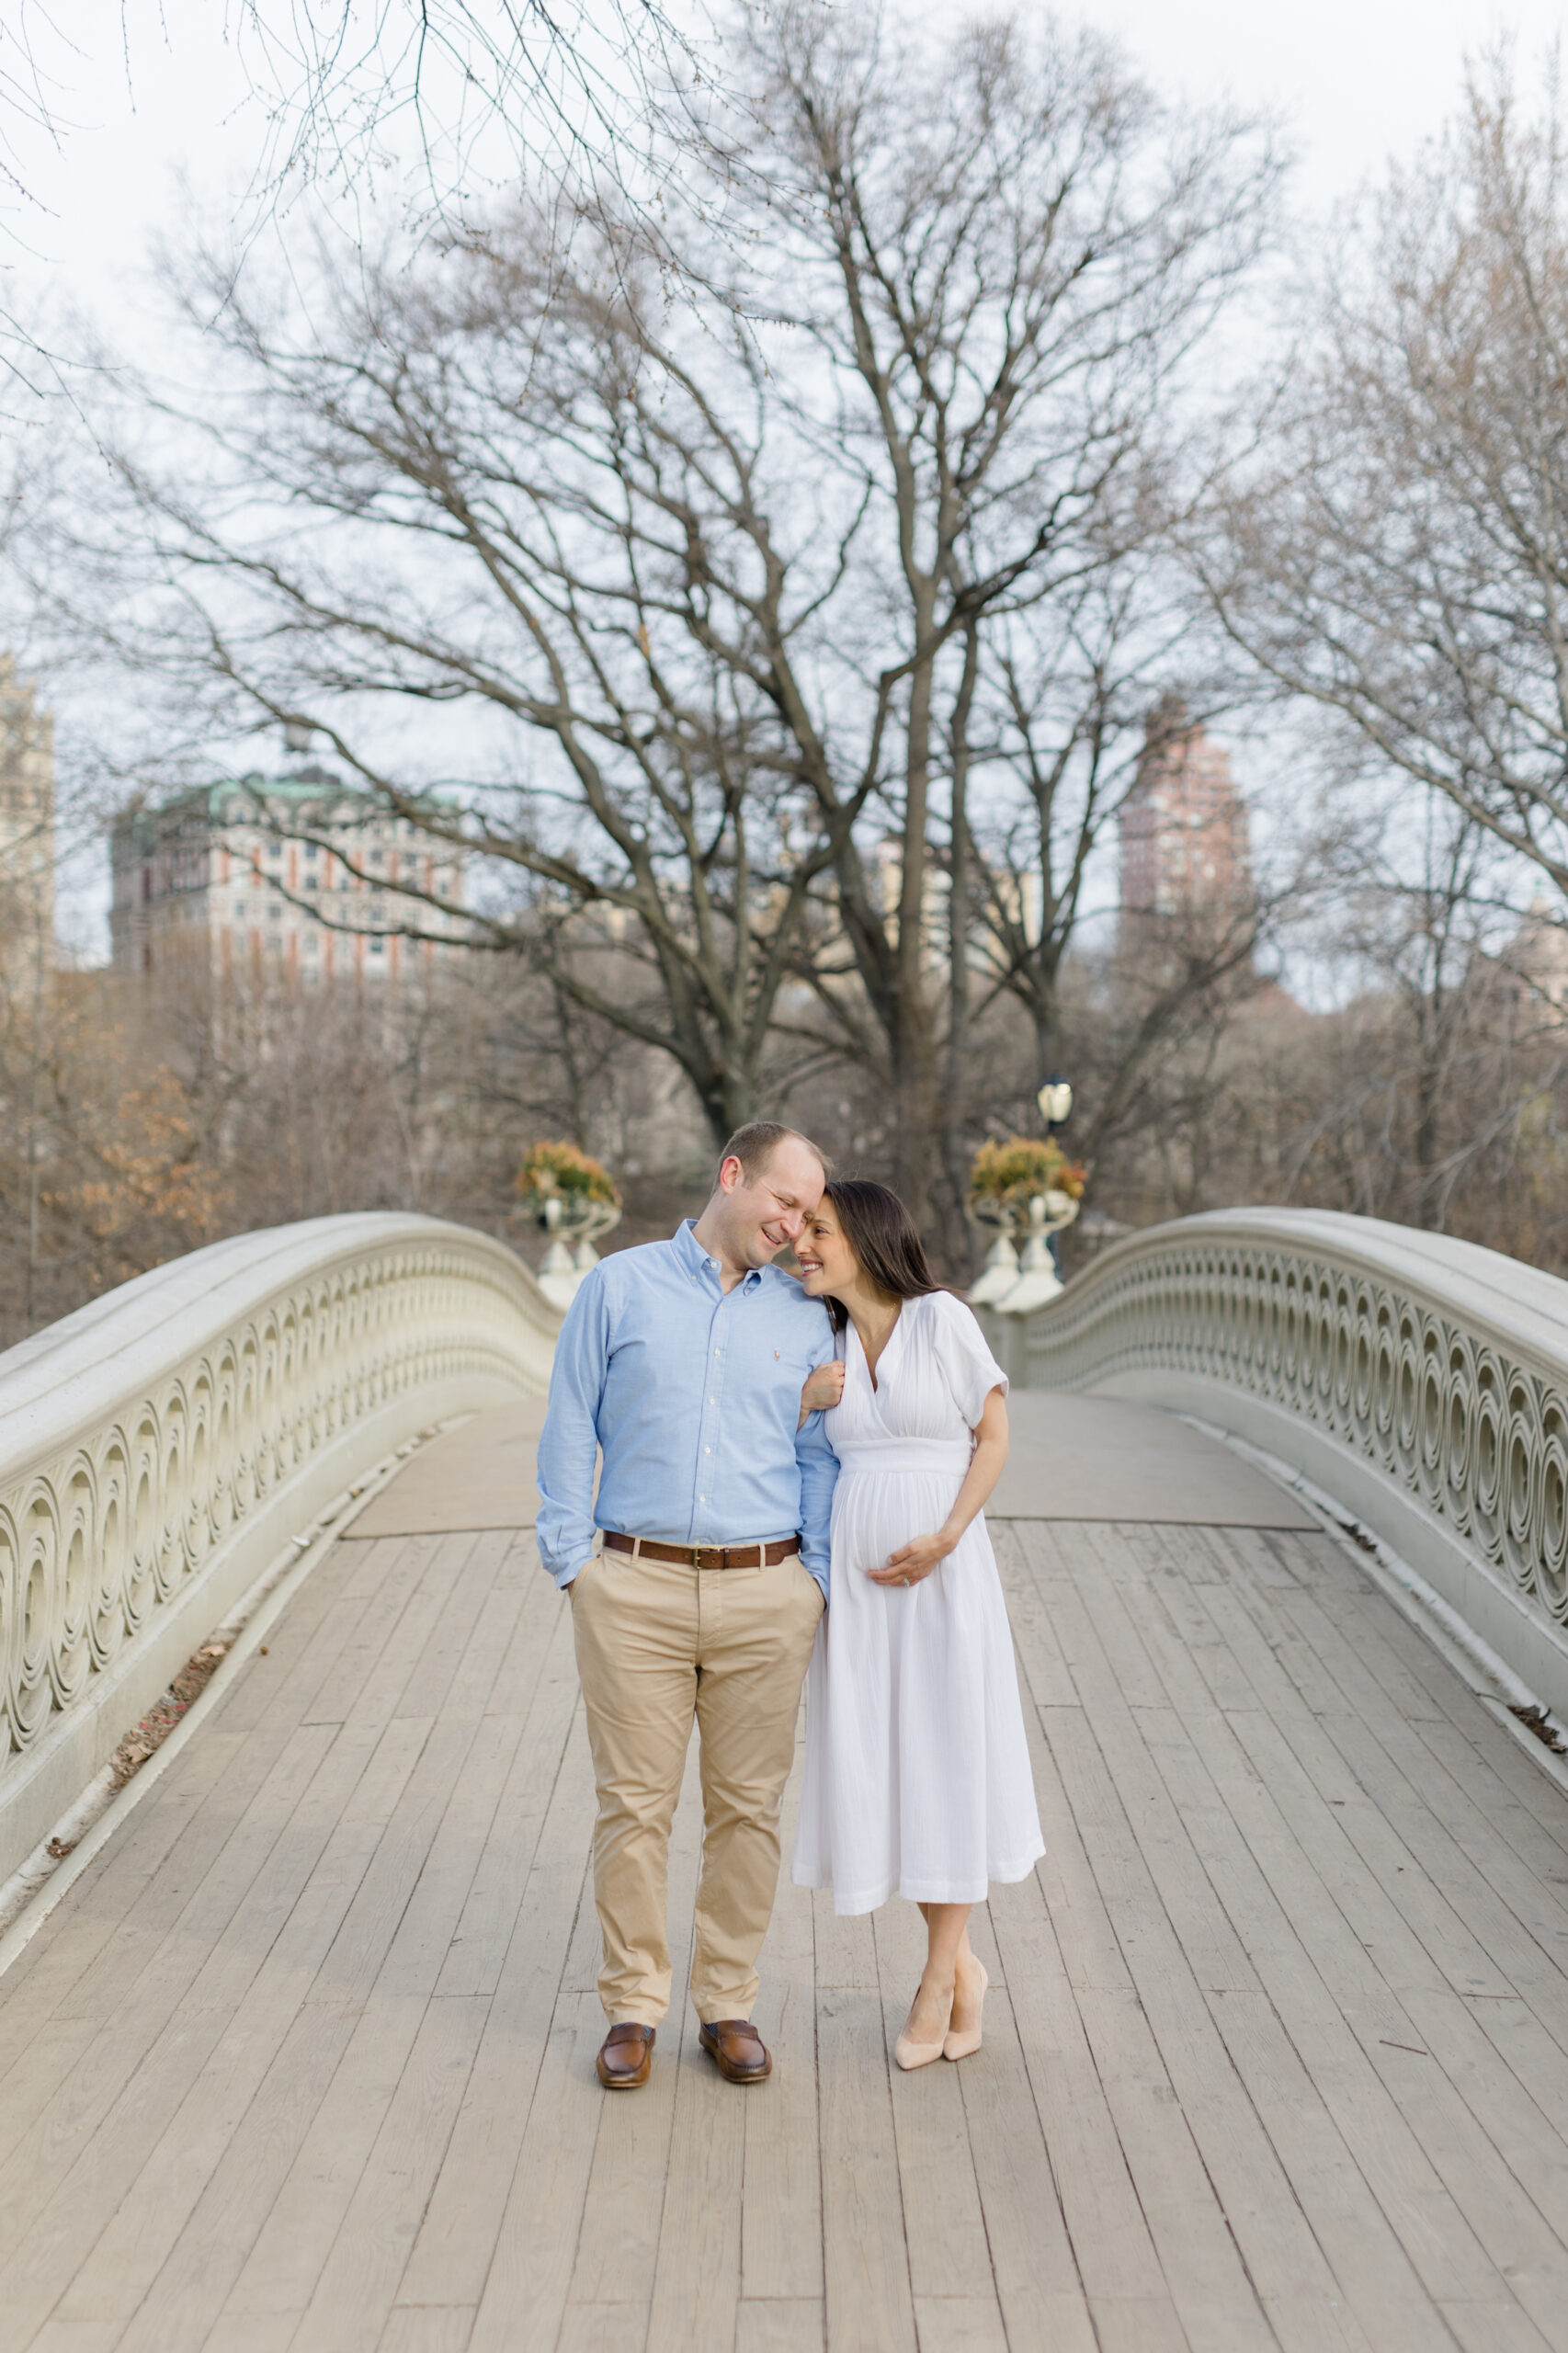 An expecting couple cuddle together in Central Park during a New York City maternity photography session with Jacqueline Clair Photography